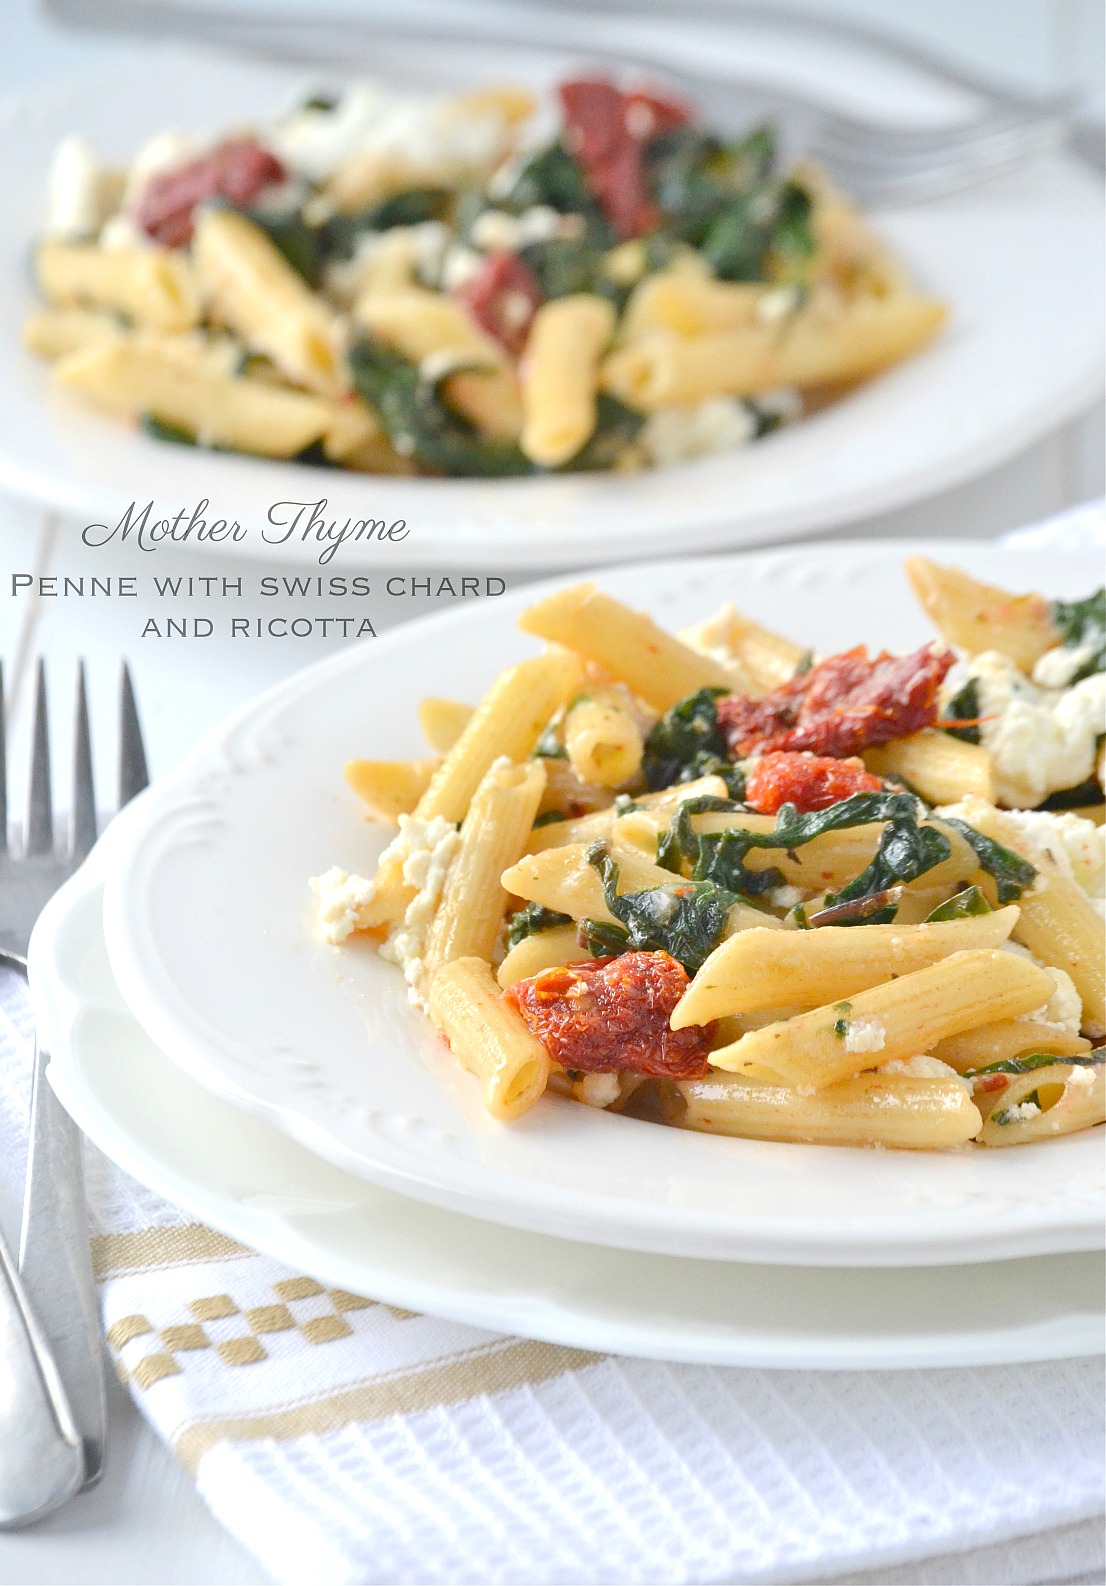 Penne with Swiss Chard and Ricotta